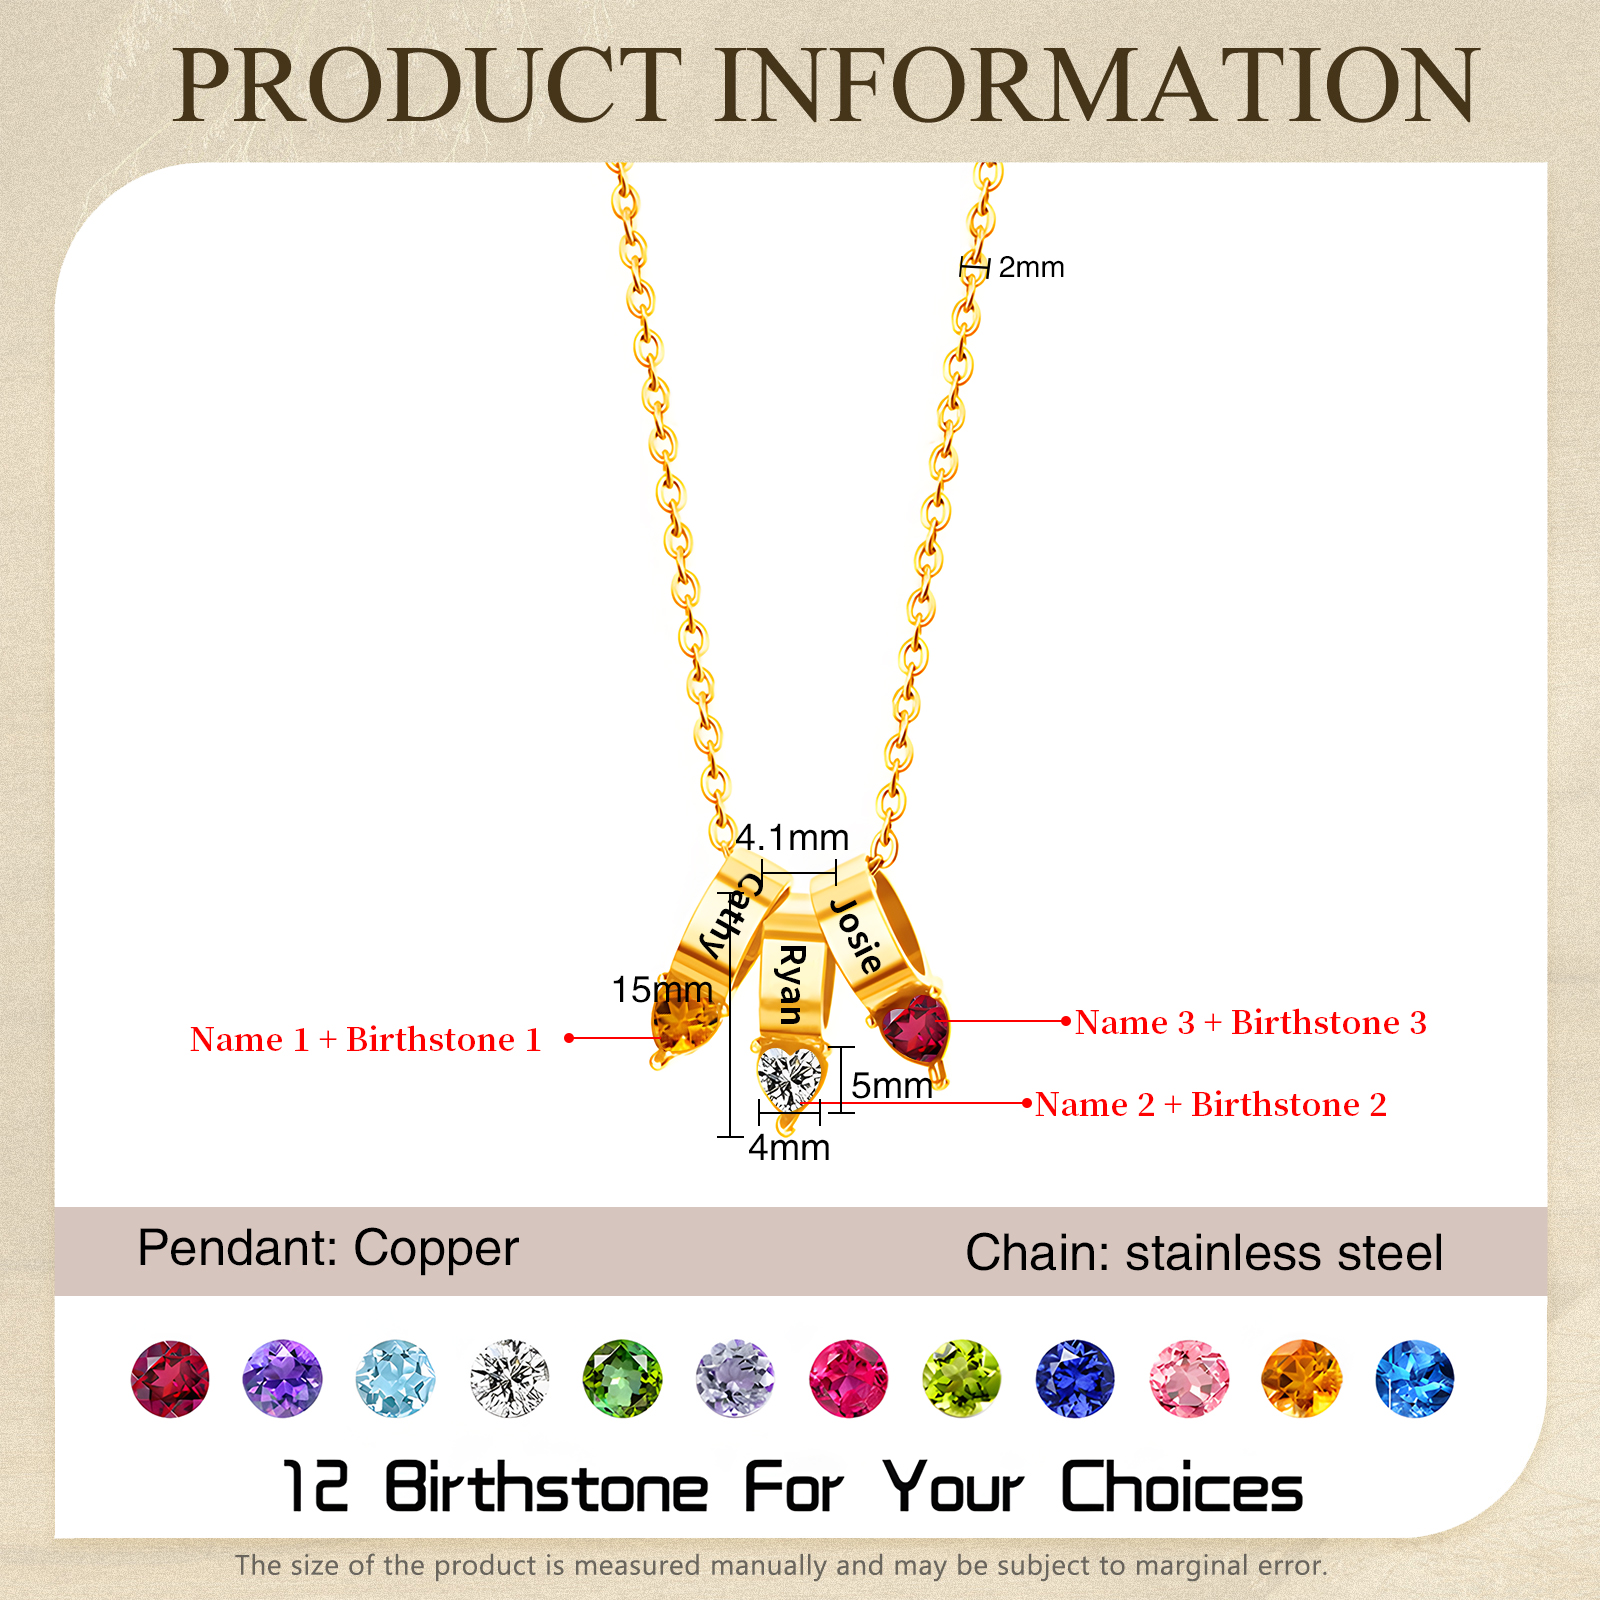 3 Names - Personalized Link Pendant Necklace with Customized Name and Birthstone Gift for Her